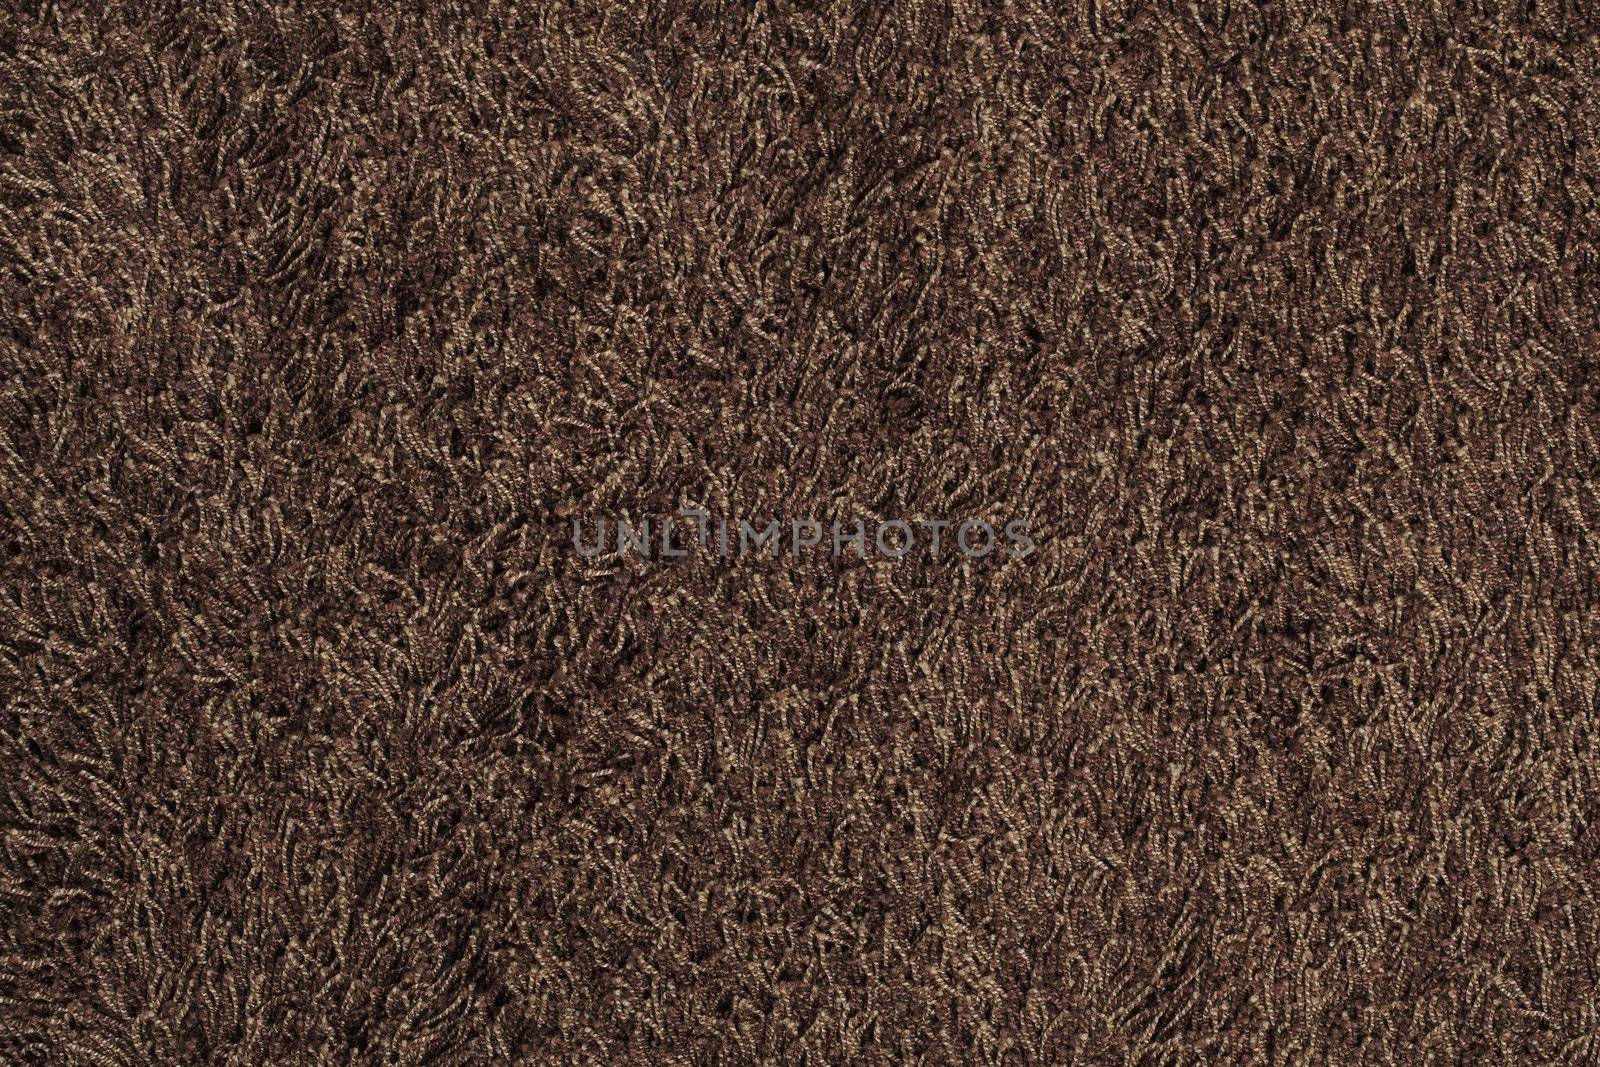 New brown fluffy rug background texture